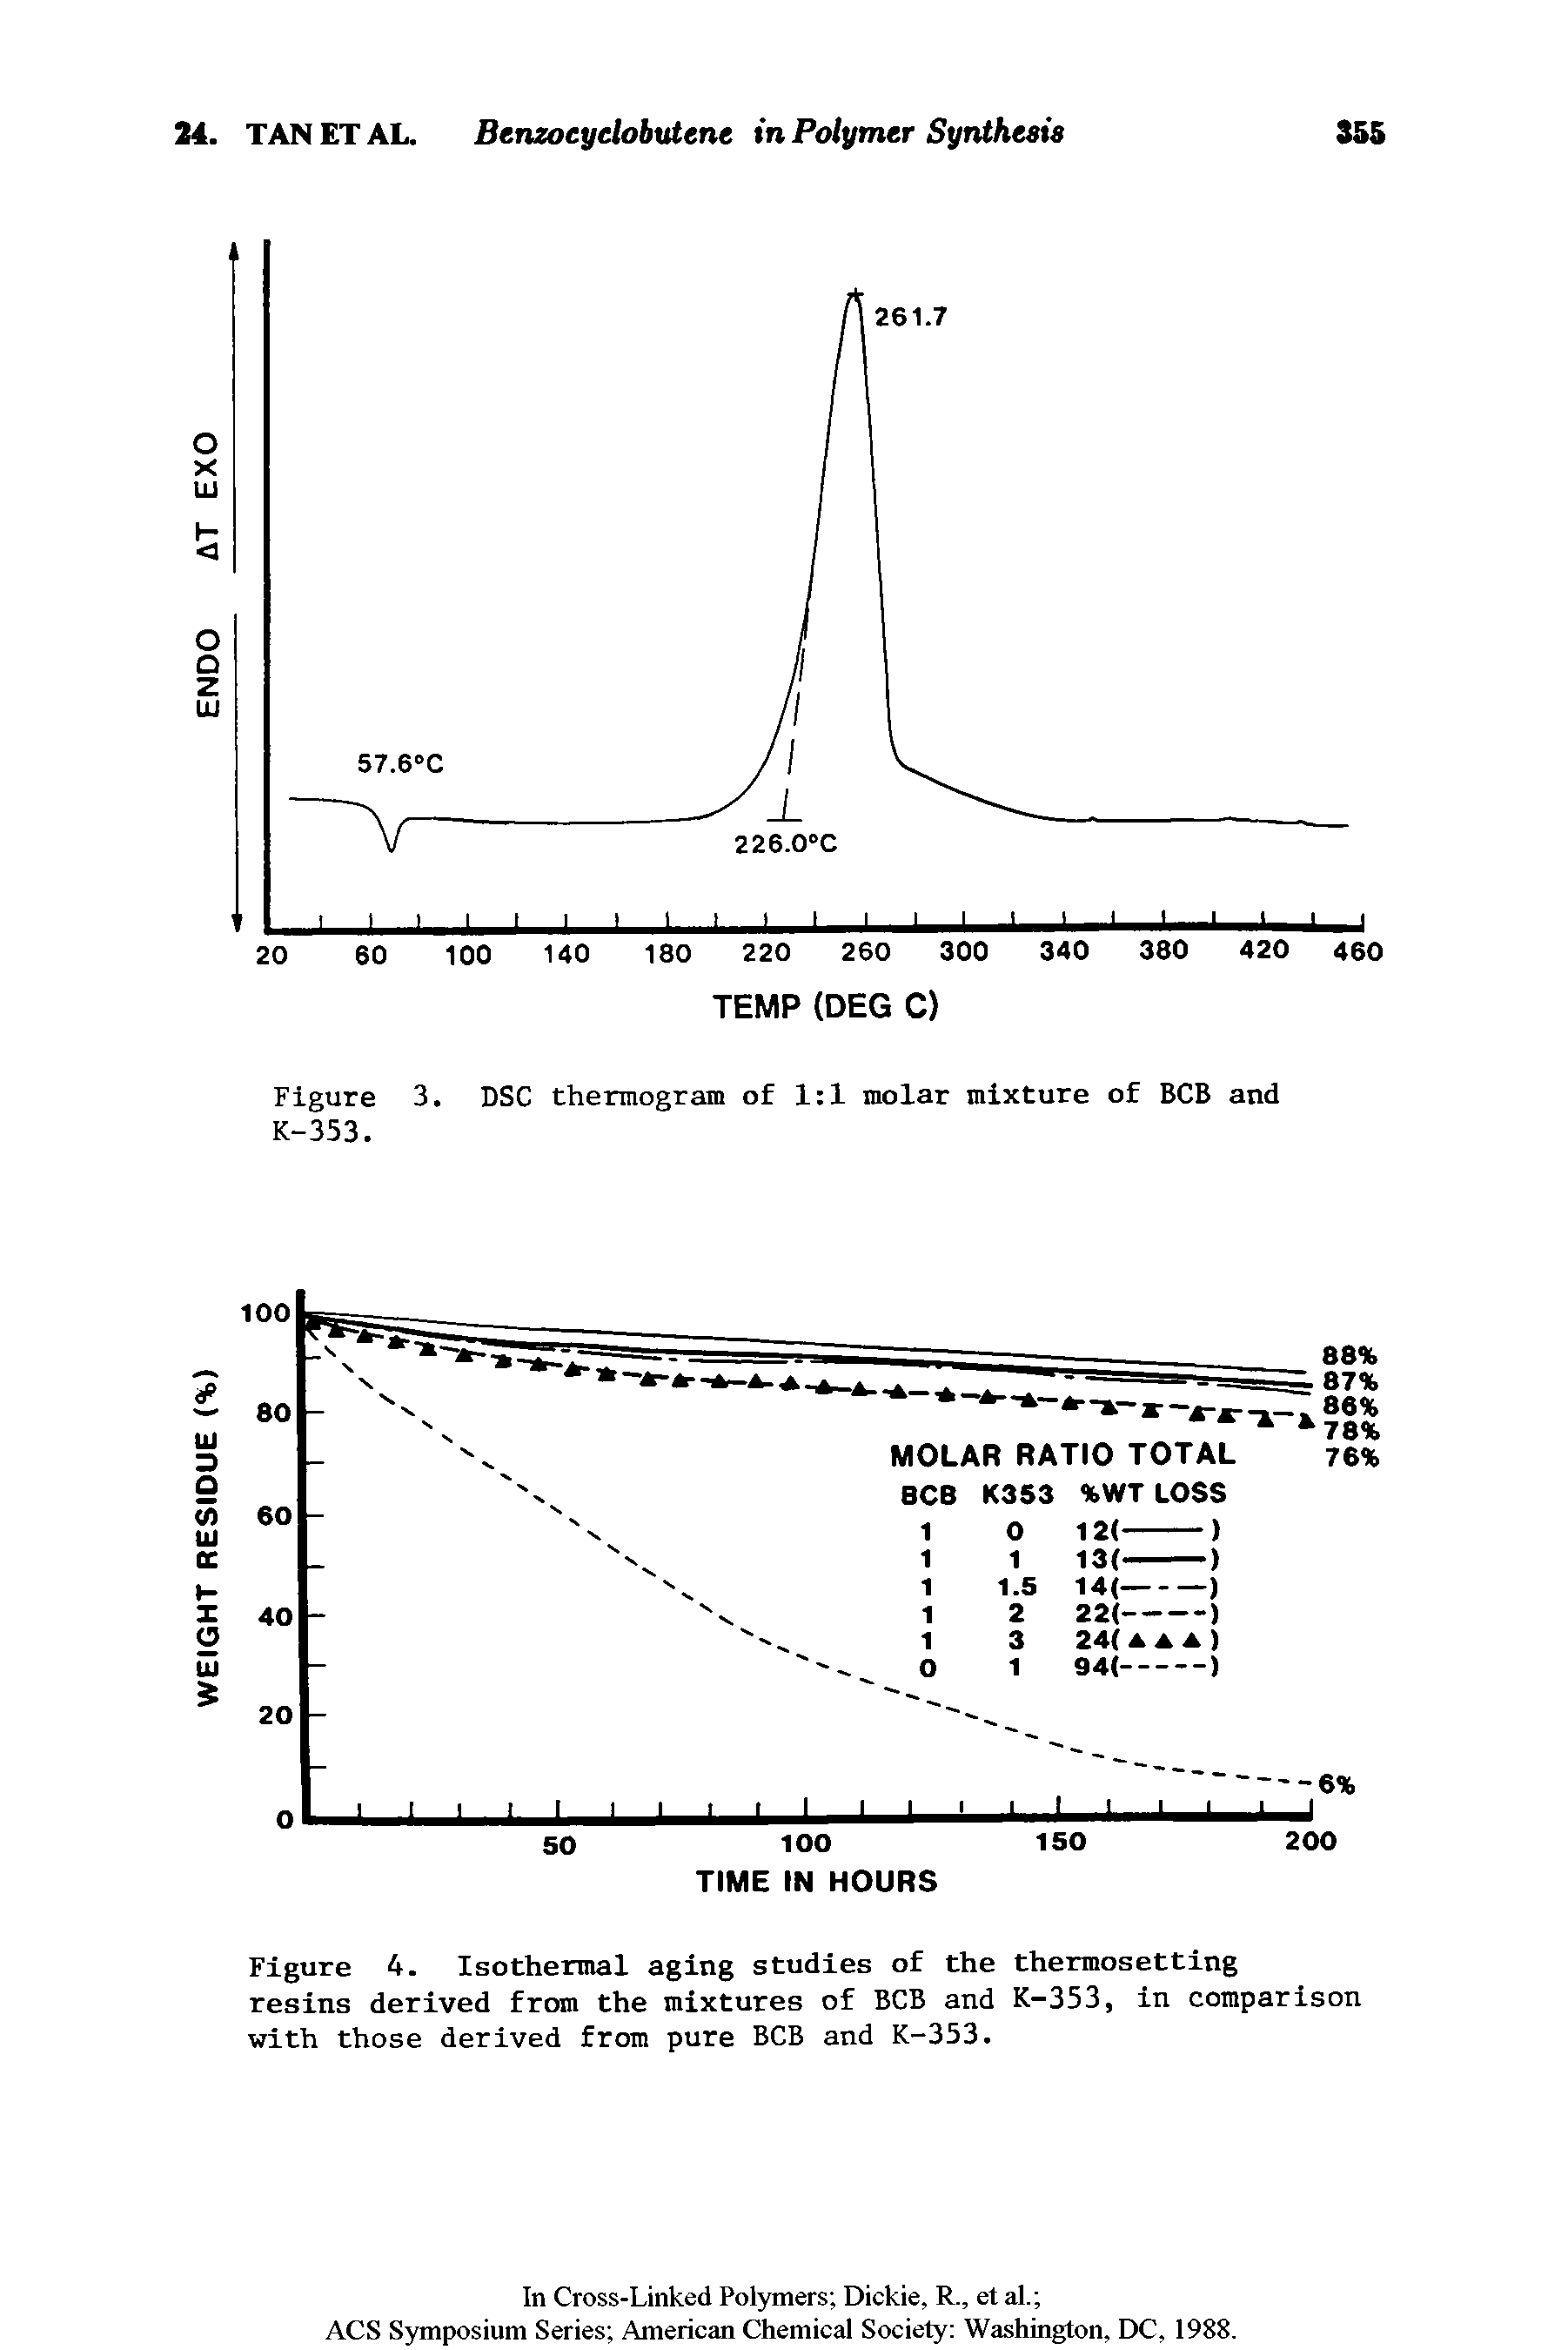 Figure 4. Isothermal aging studies of the thermosetting resins derived from the mixtures of BCB and K-353, in comparison with those derived from pure BCB and K-353.